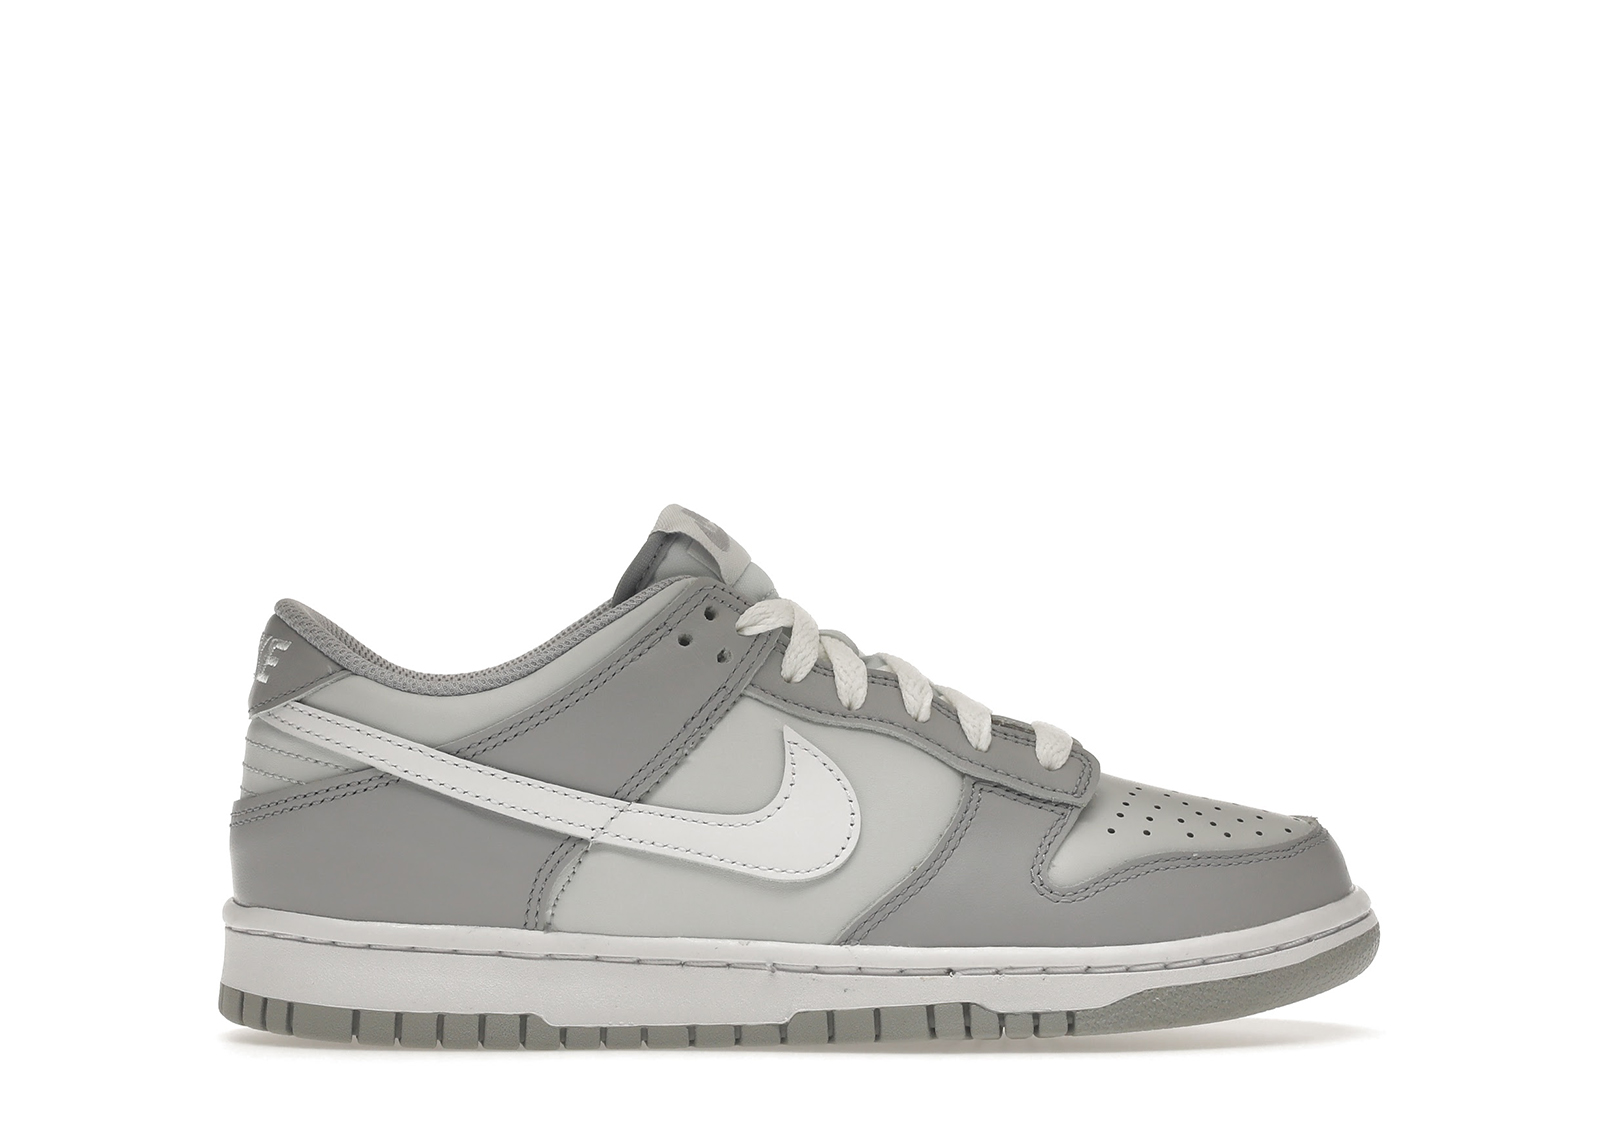 Nike Dunk Low Two-Toned Grey (GS) Kids' - DH9765-001 - US